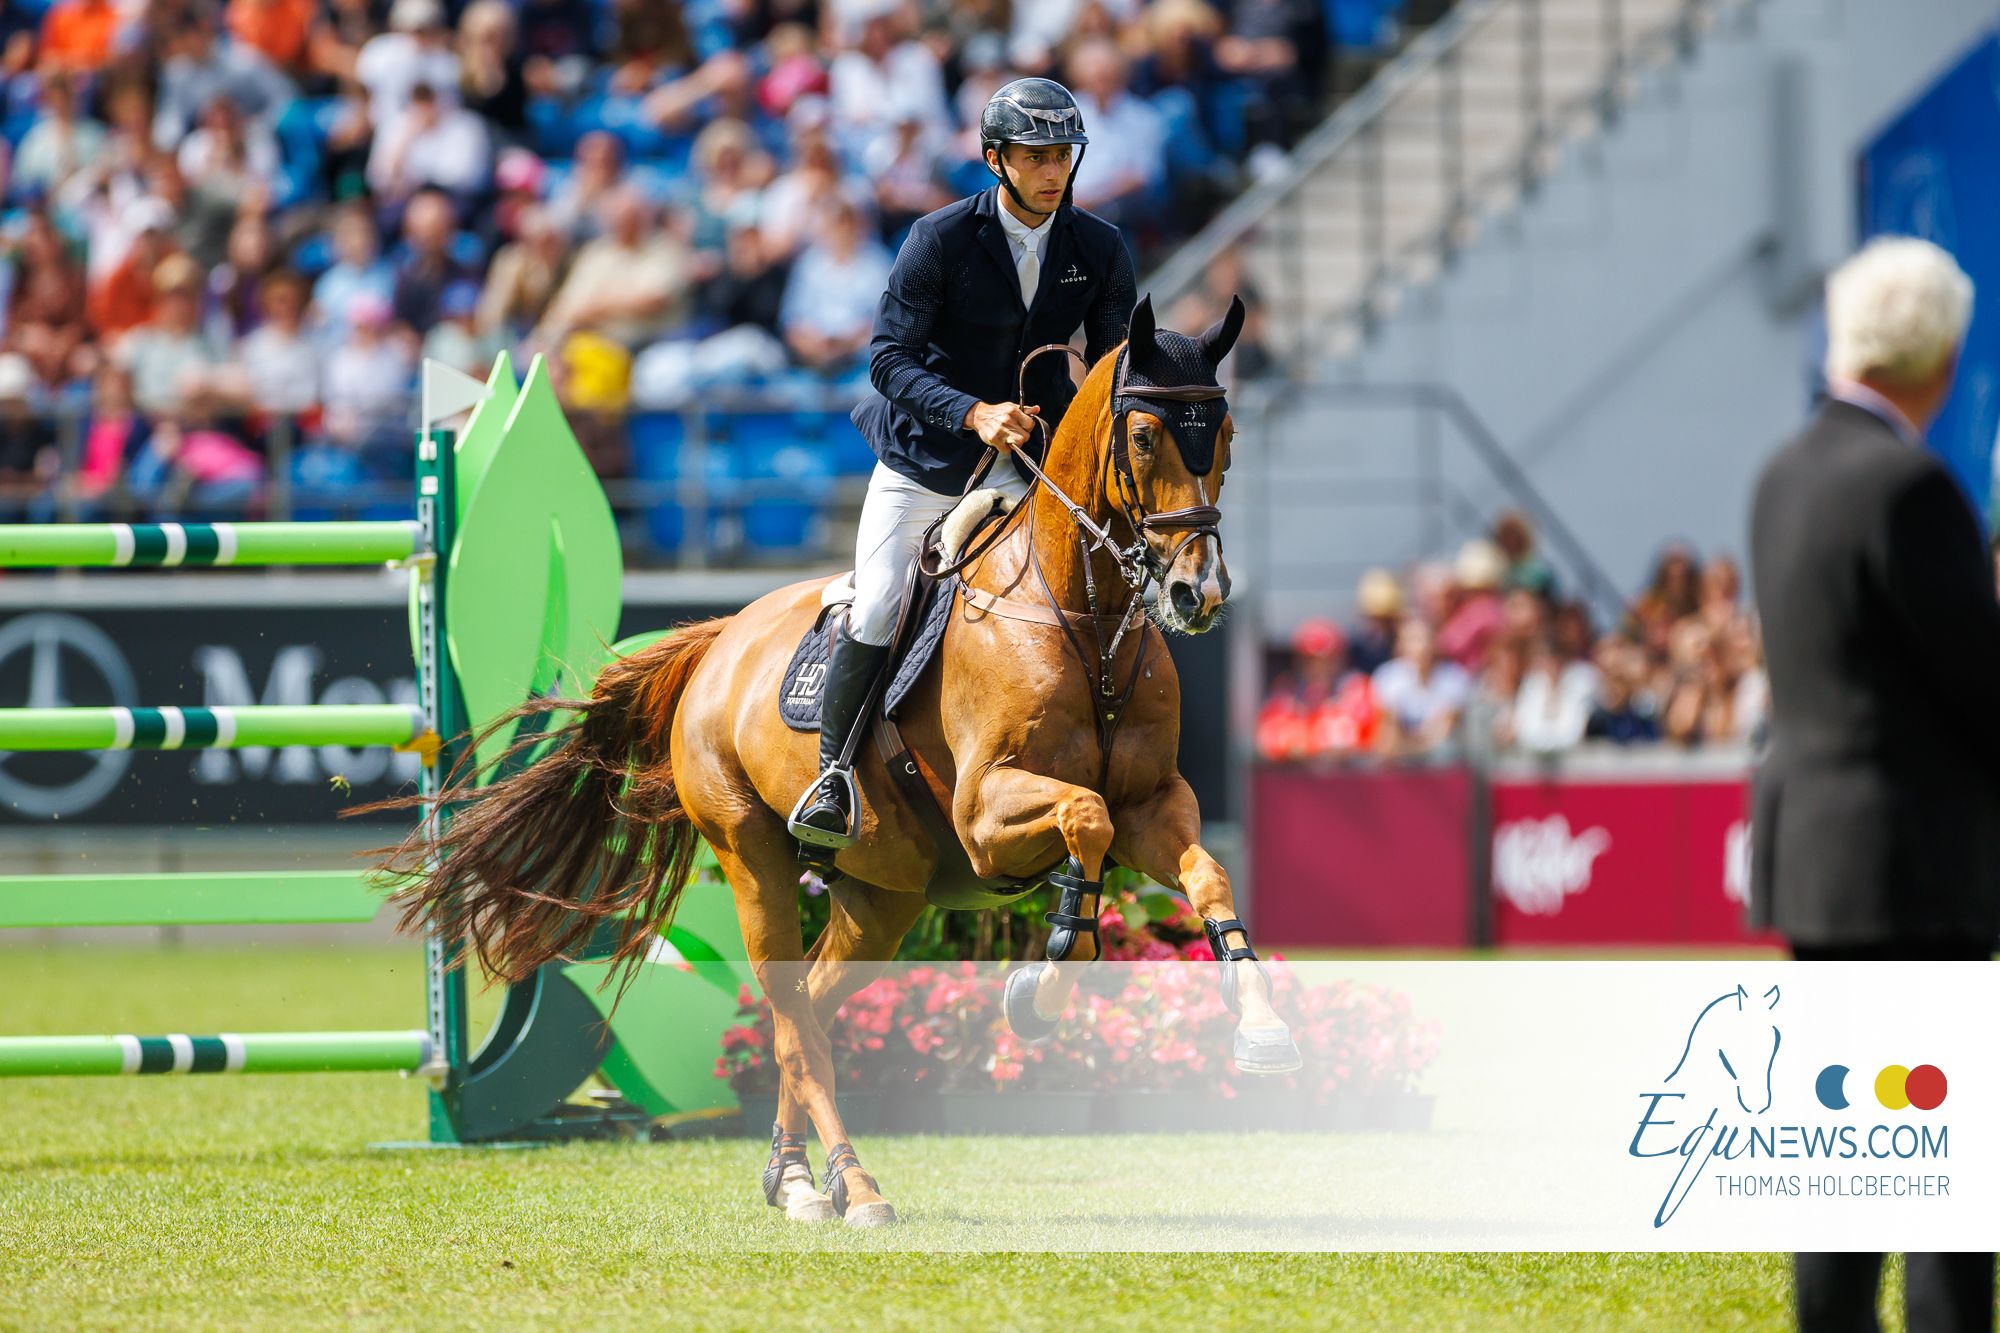 Richard Vogel replaces Eoin McMahon in GCL Mexico!